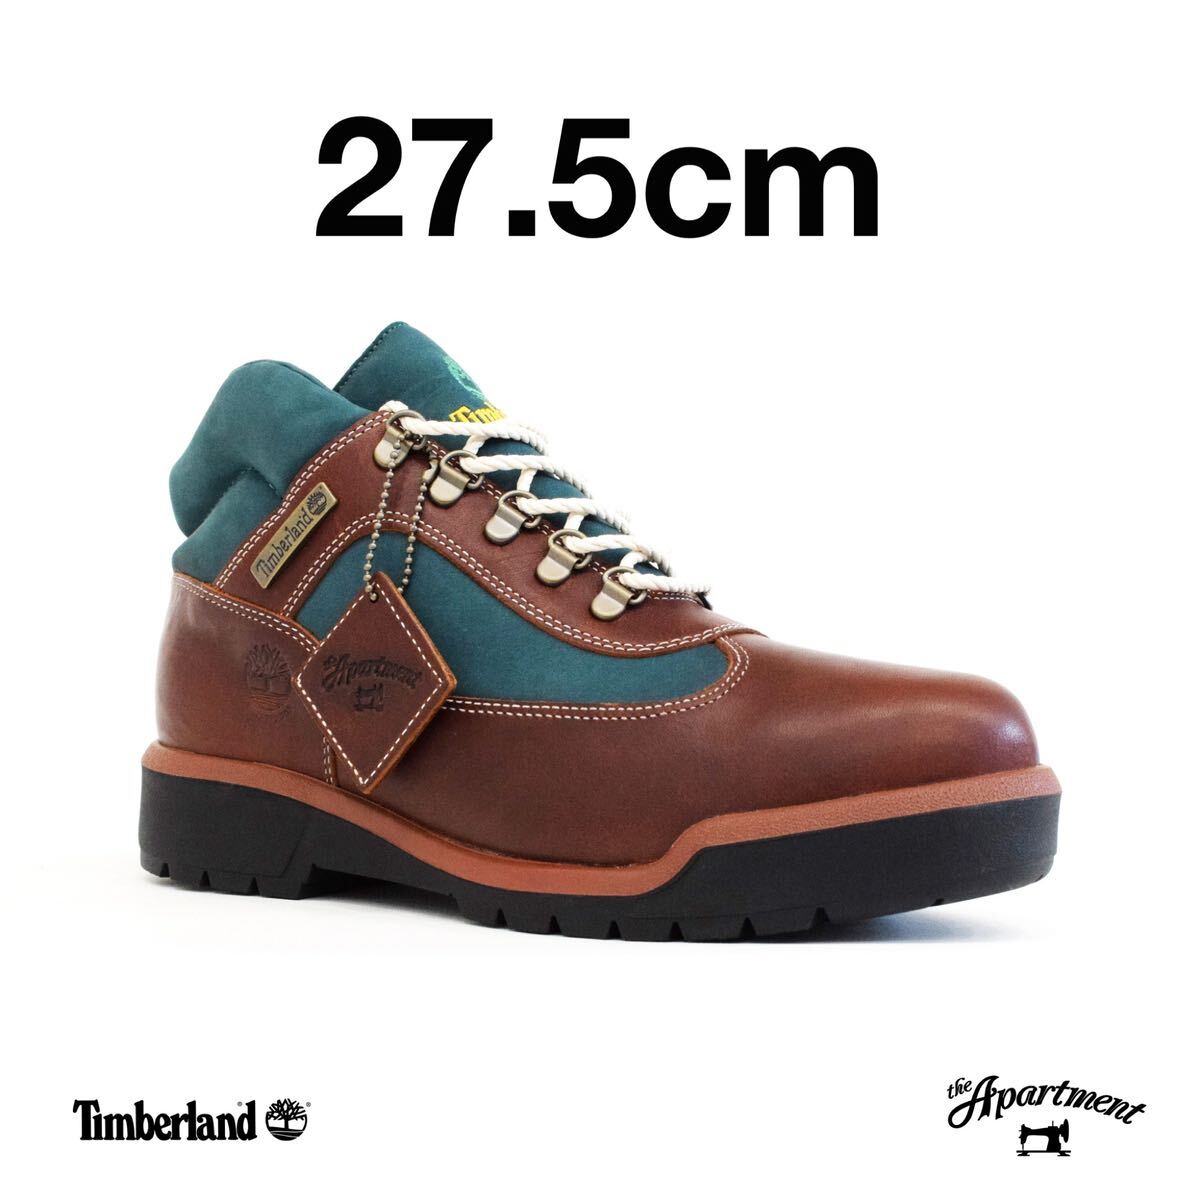 [27.5cm] Timberland the Apartment FIELD BOOT The Old Man and the Sea US9.5 _画像1